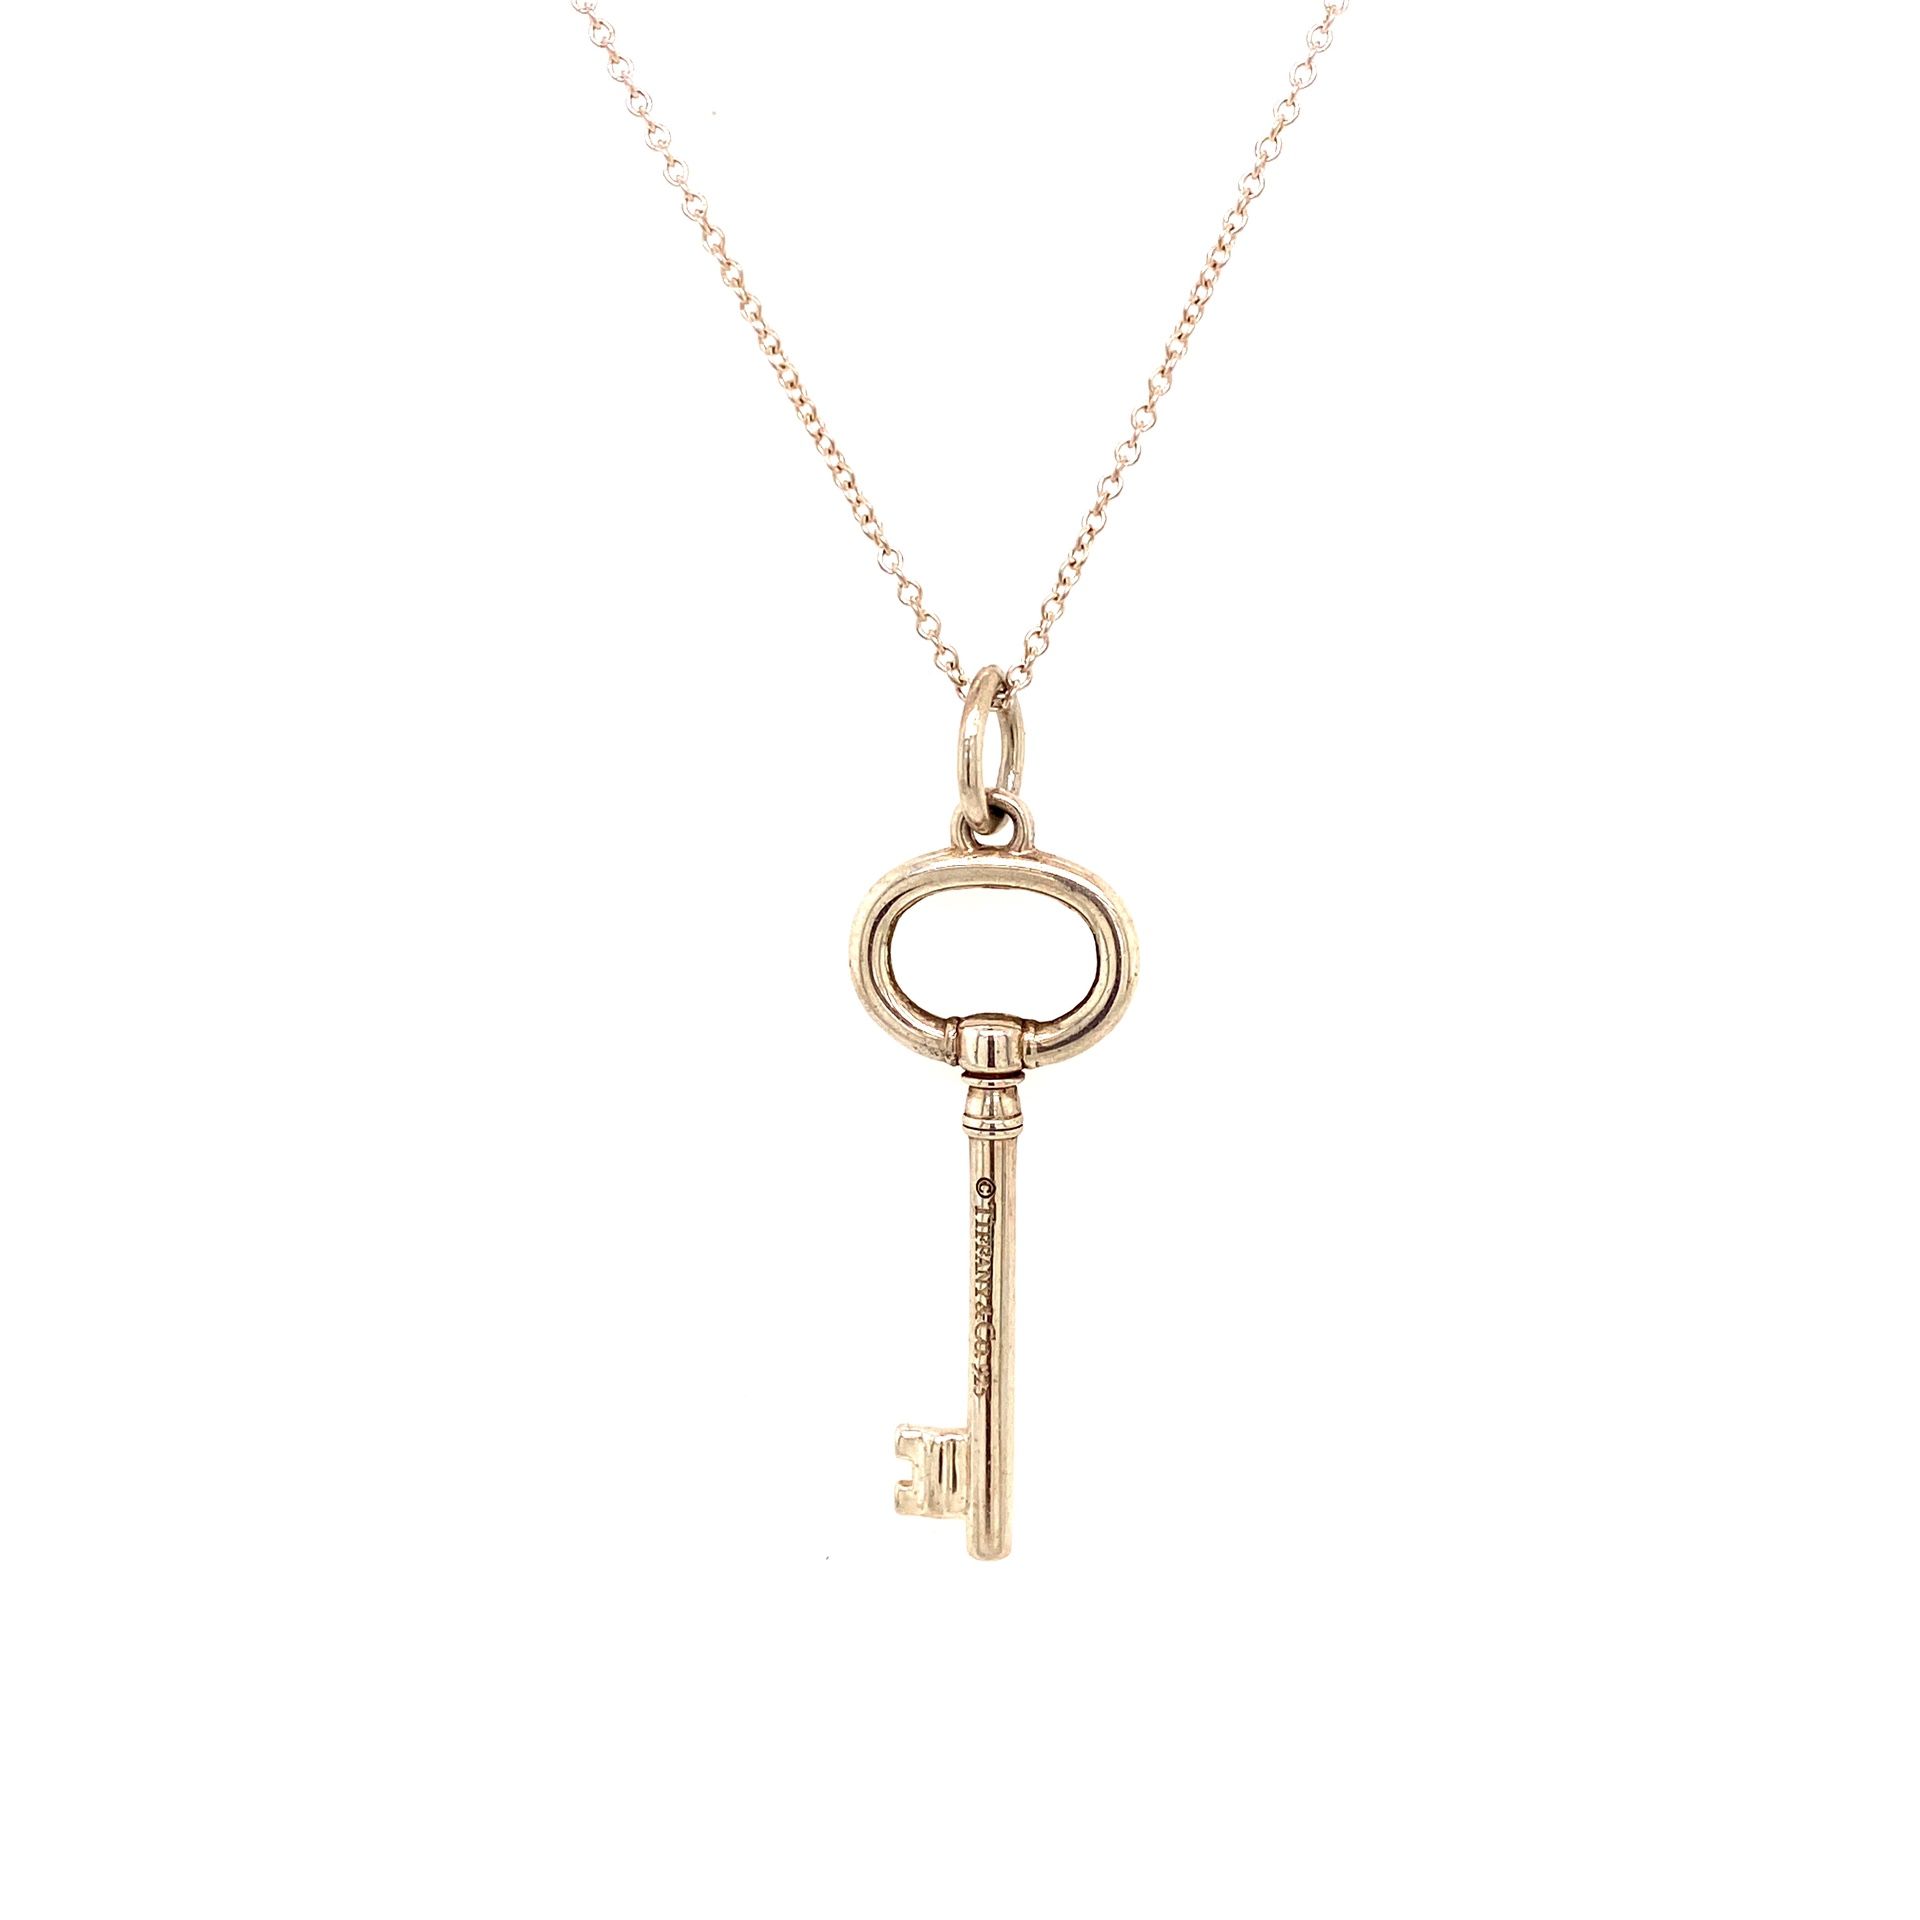 Tiffany and Co Silver Key Necklace